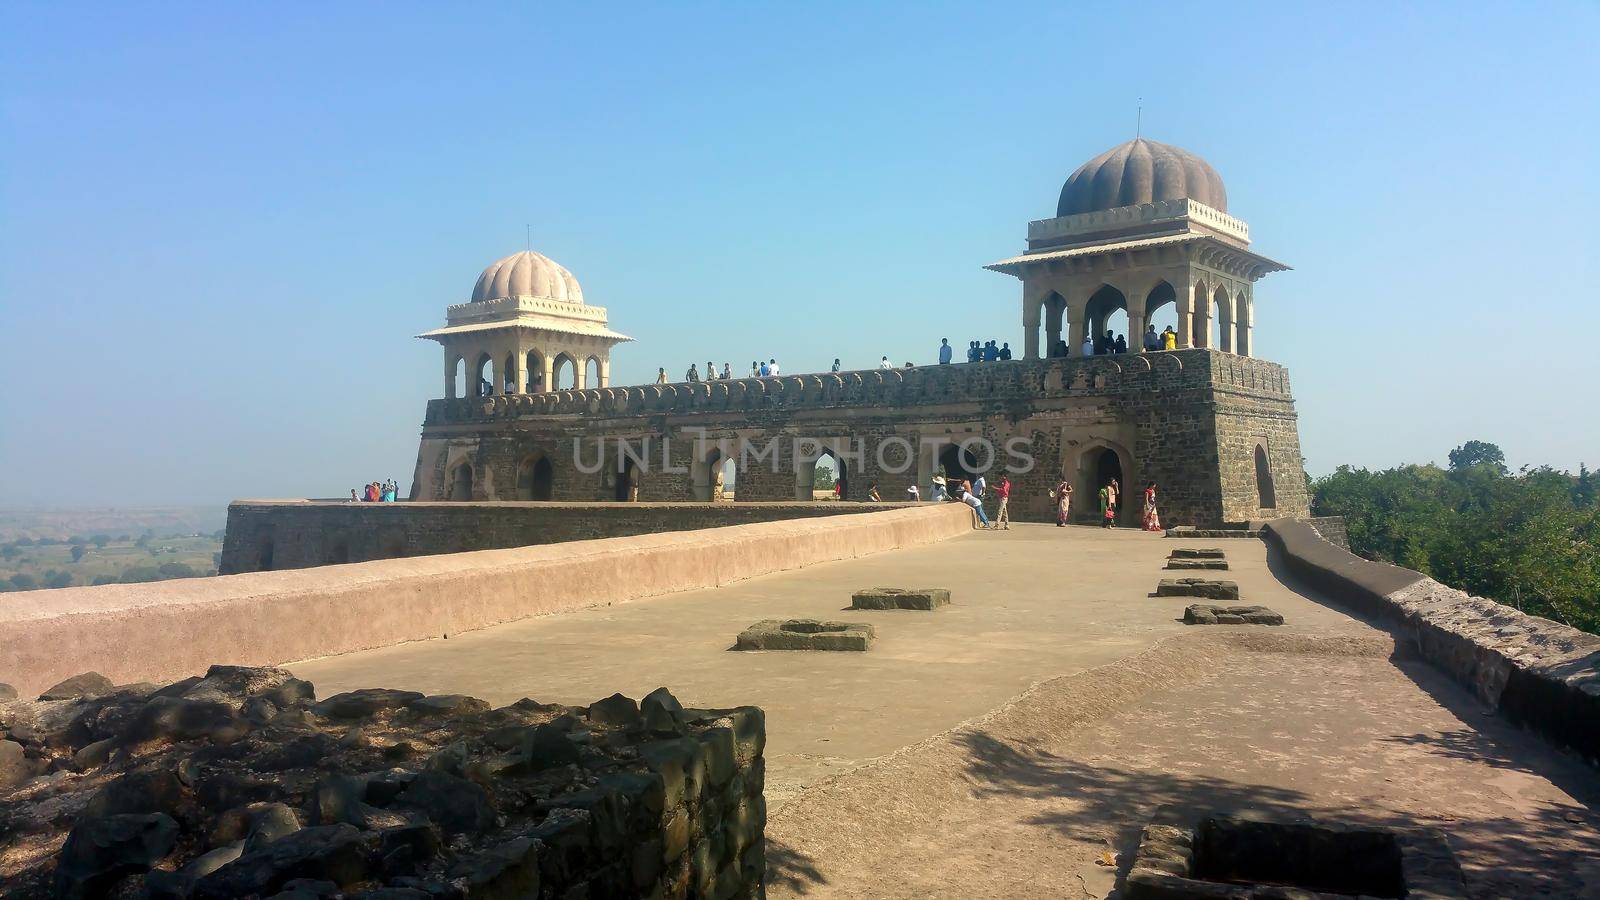 The Pavilion or Mahal of Rani Rupmati palace have Afghan architectural style & was originally constructed as an army observatory at Mandu in Dhaar district of Madhya Pradesh, India.